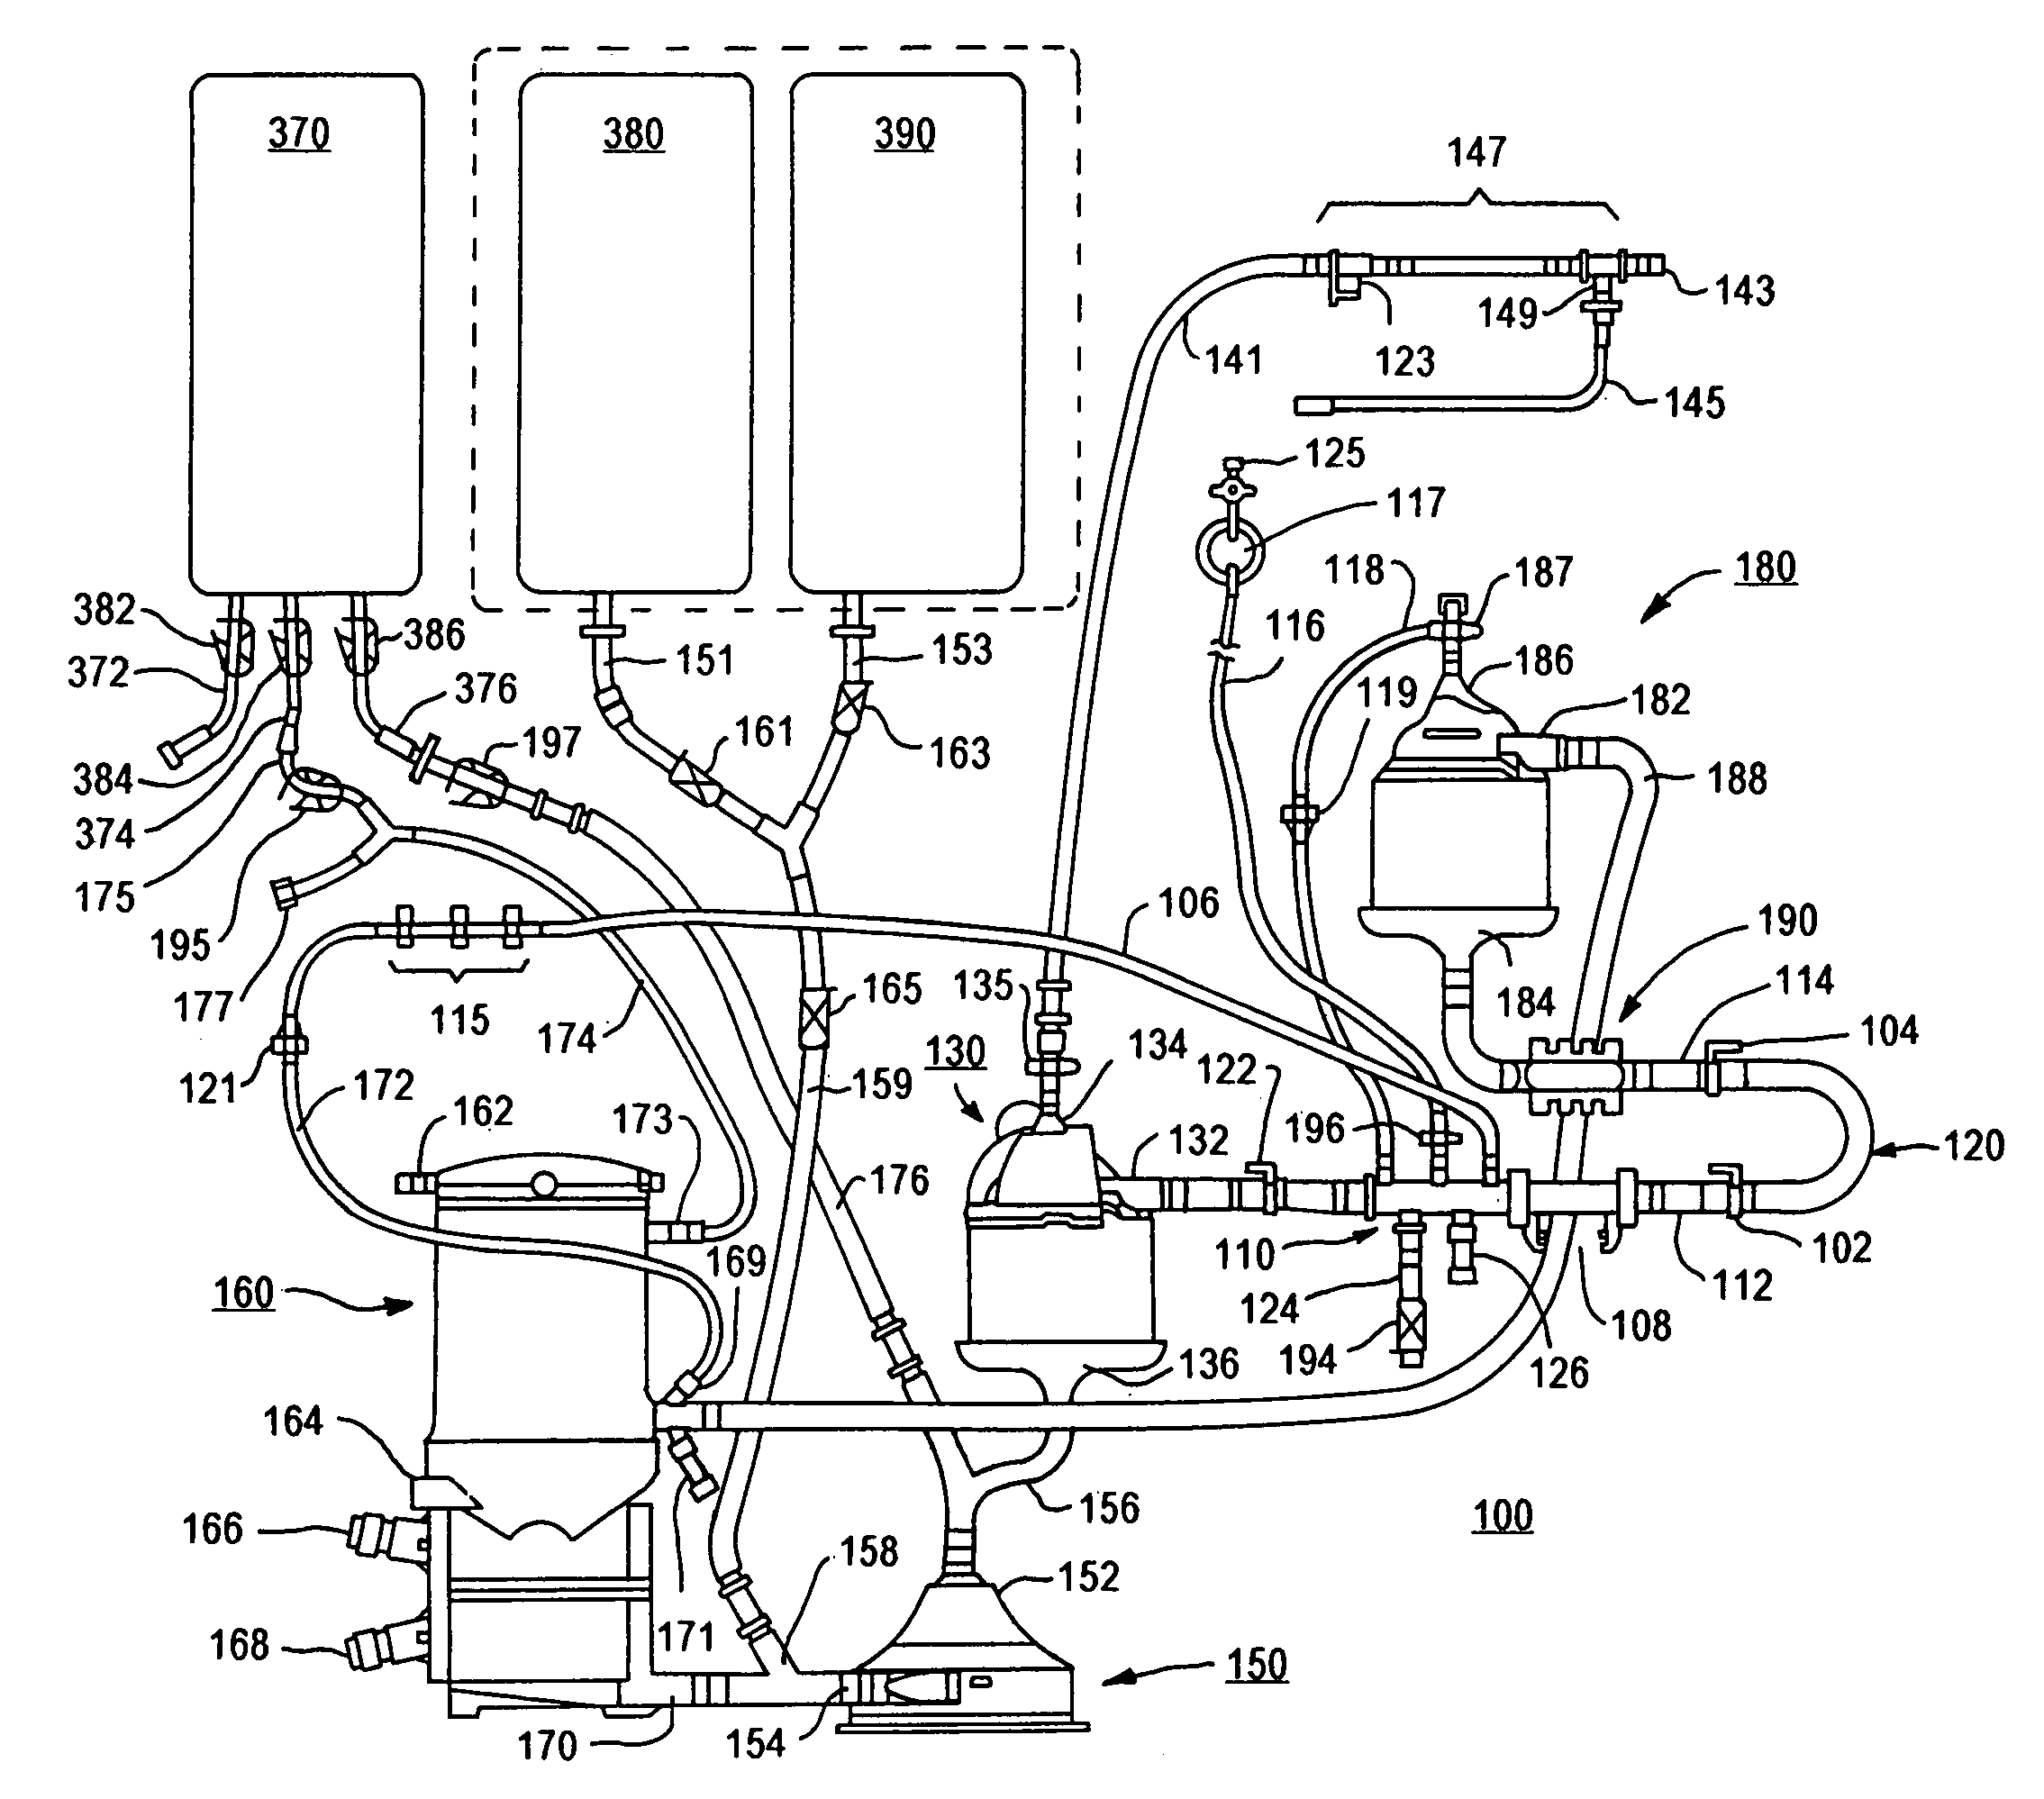 Disposable, integrated, extracorporeal blood circuit